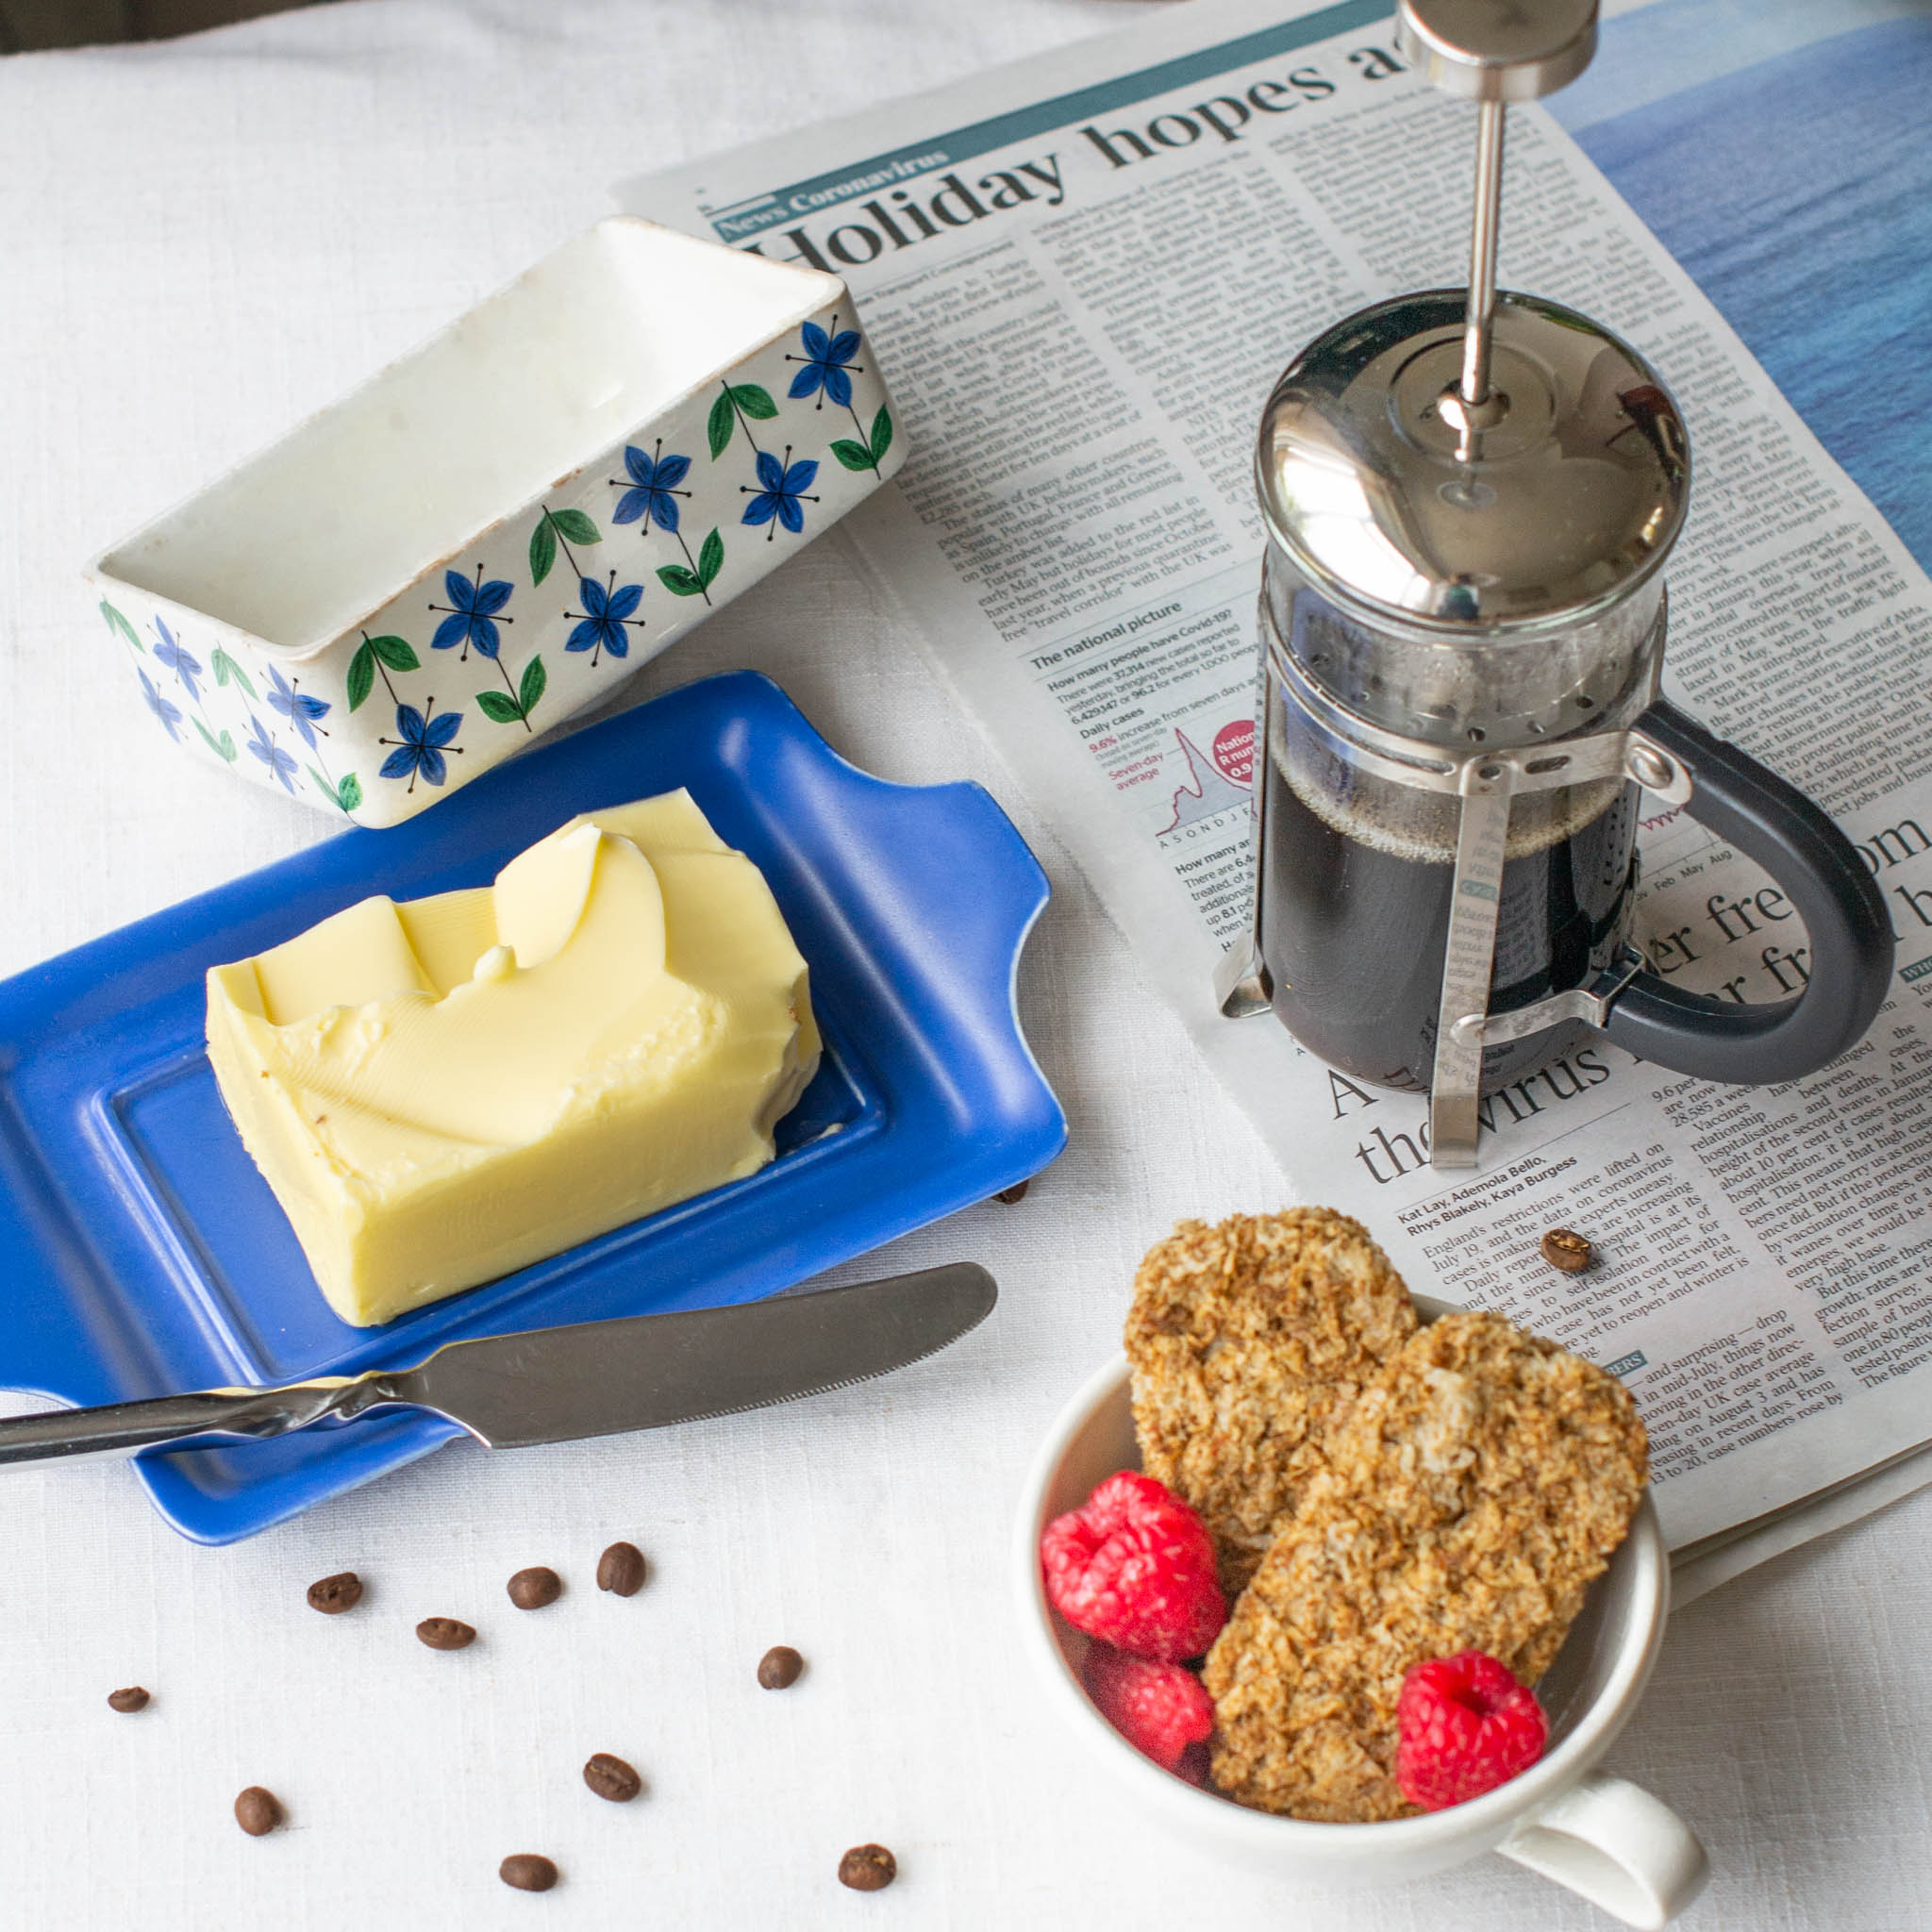 Mini cafetiere sitting on open copy of The Times beside blue butter dish and bowl of Weetabix with raspberries